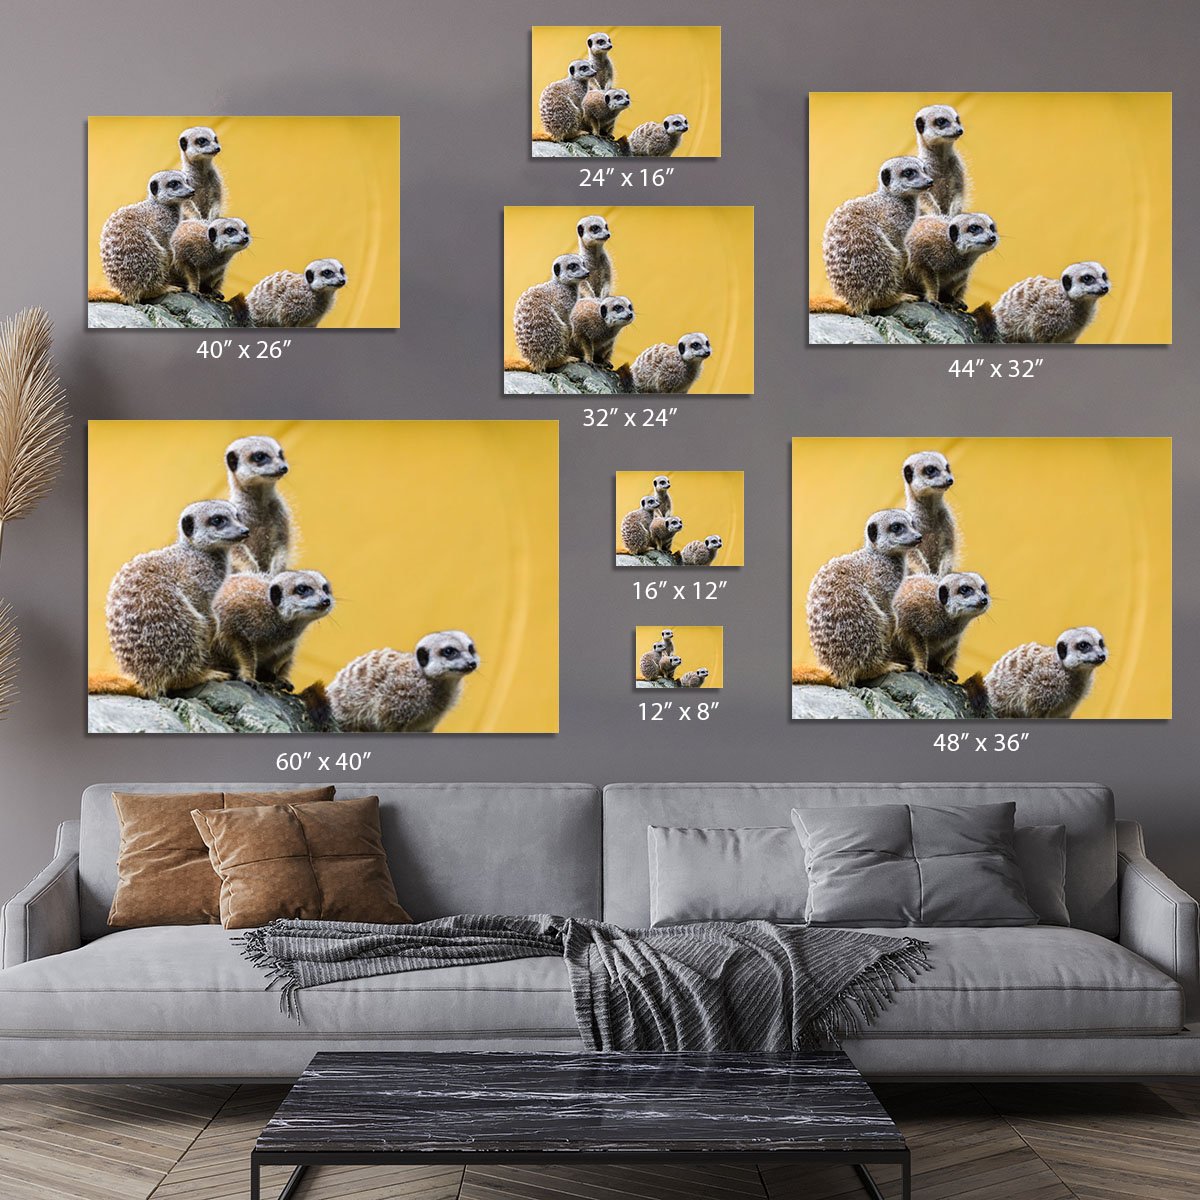 A group of meerkats seen on top of a rock Canvas Print or Poster